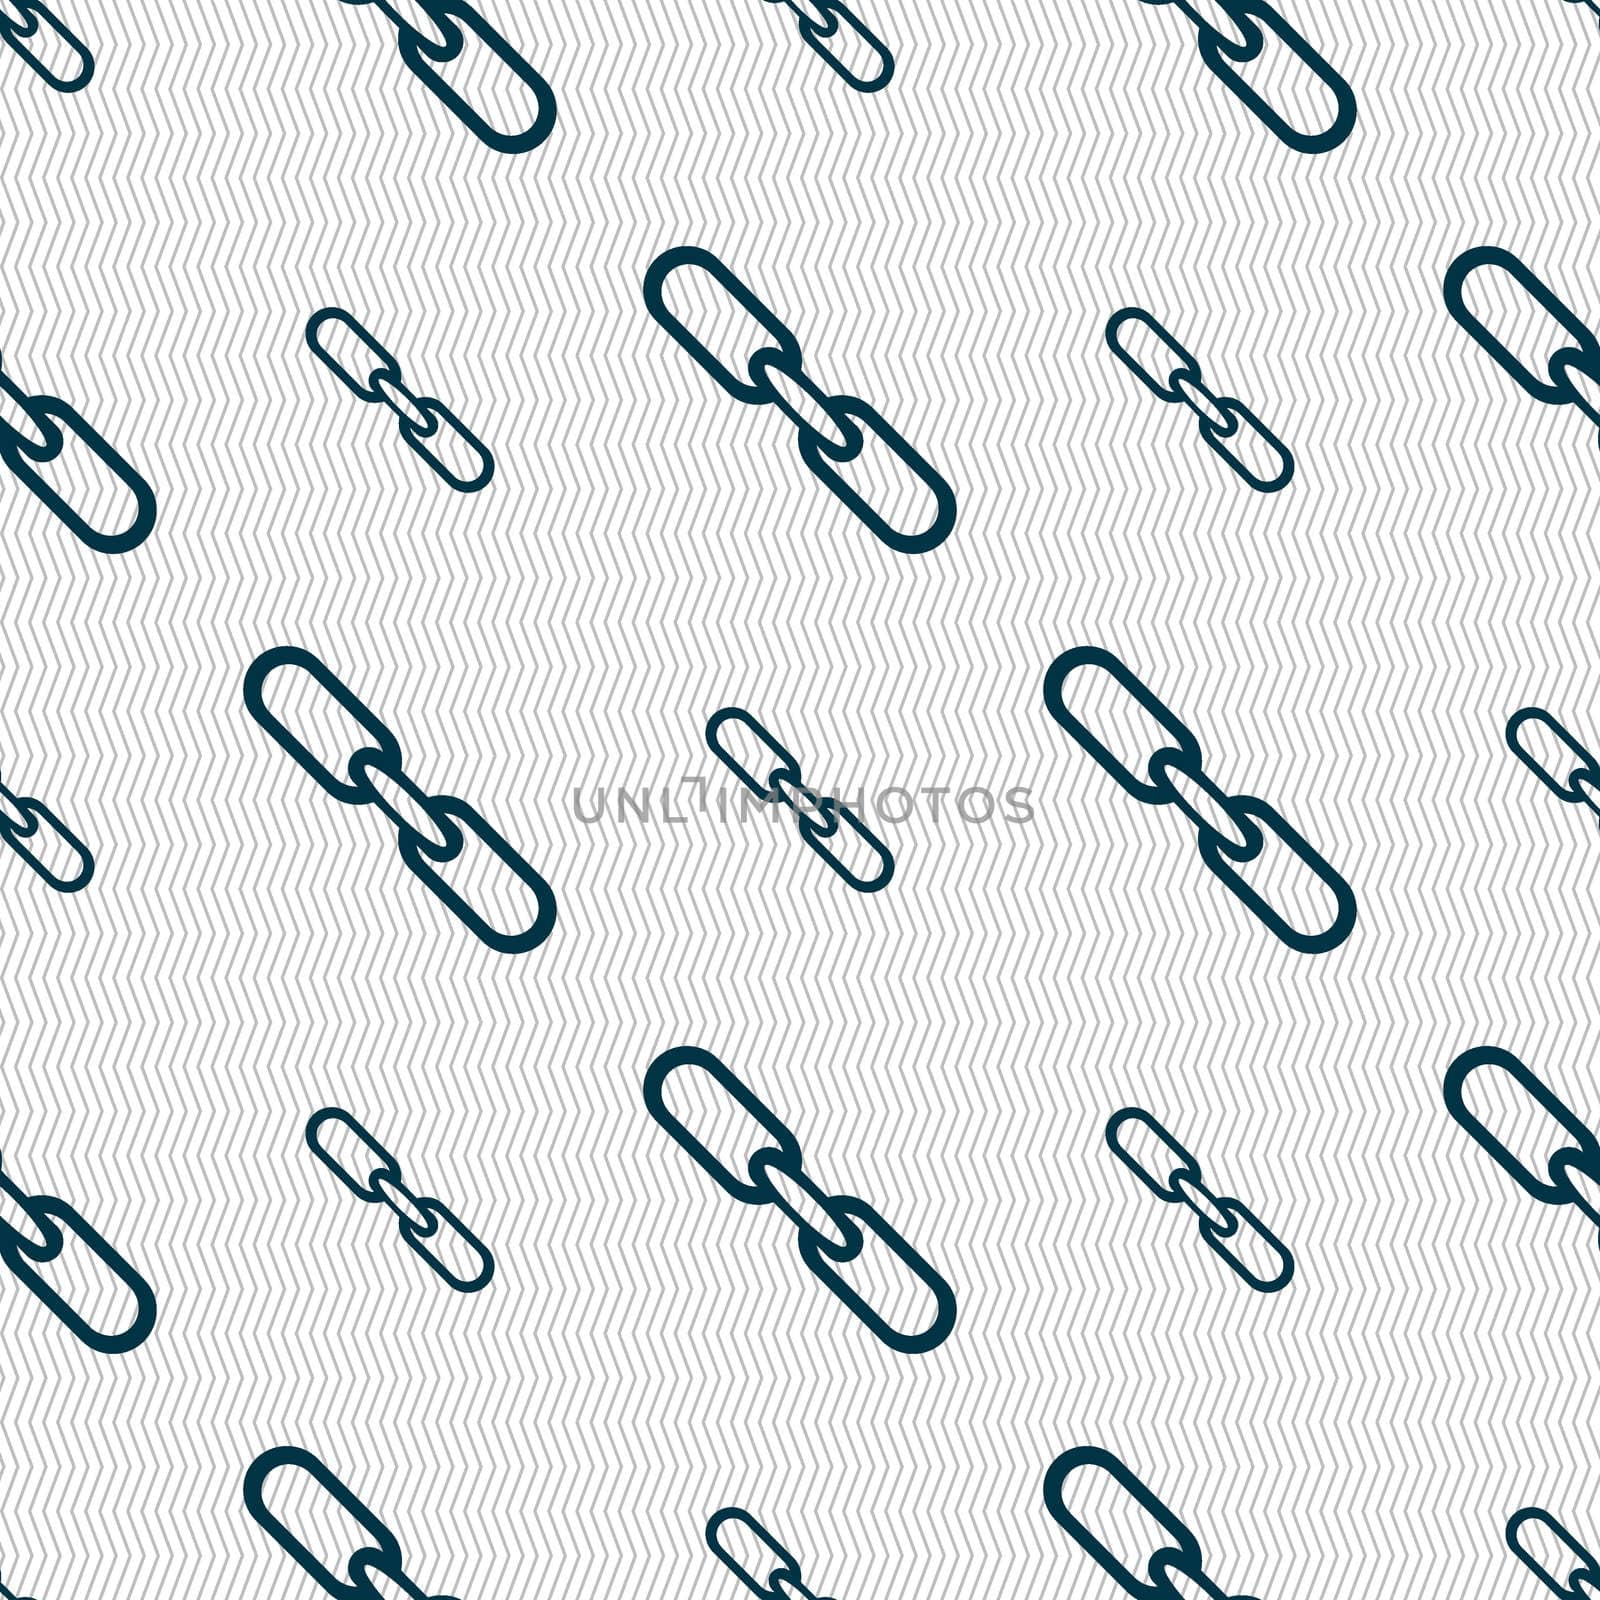 Link sign icon. Hyperlink chain symbol. Seamless abstract background with geometric shapes.  by serhii_lohvyniuk